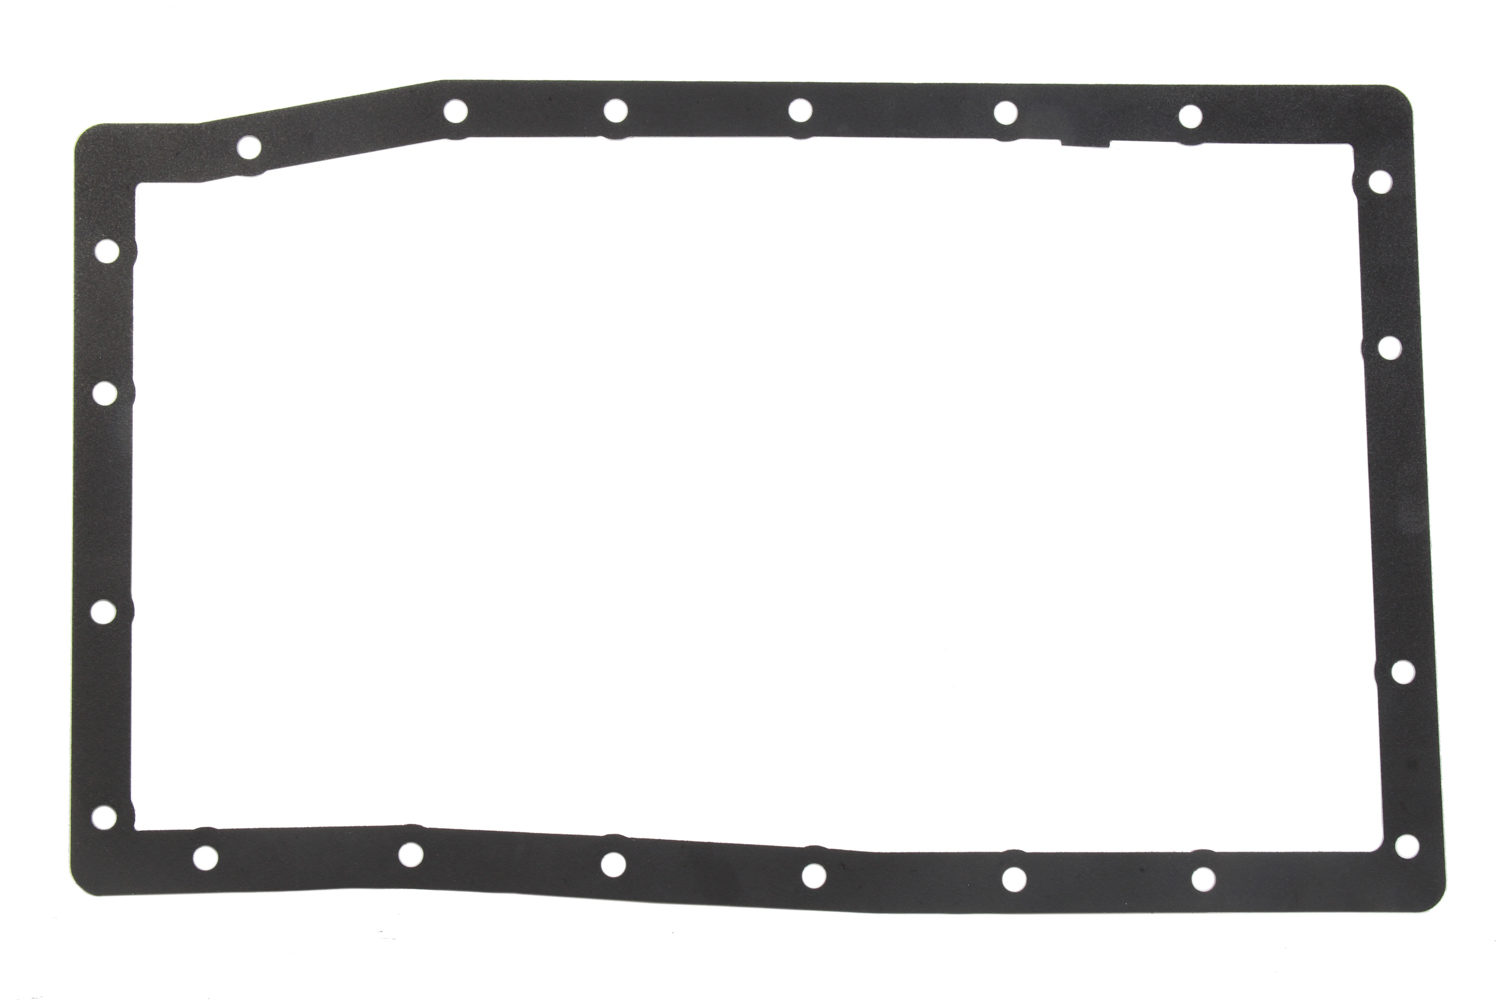 Cometic Gaskets C14122-060 - Transmission Pan Gasket, 0.060 in Thick, Rubber Coated Aluminum, Toyota A750X / A760X Transmission, Each